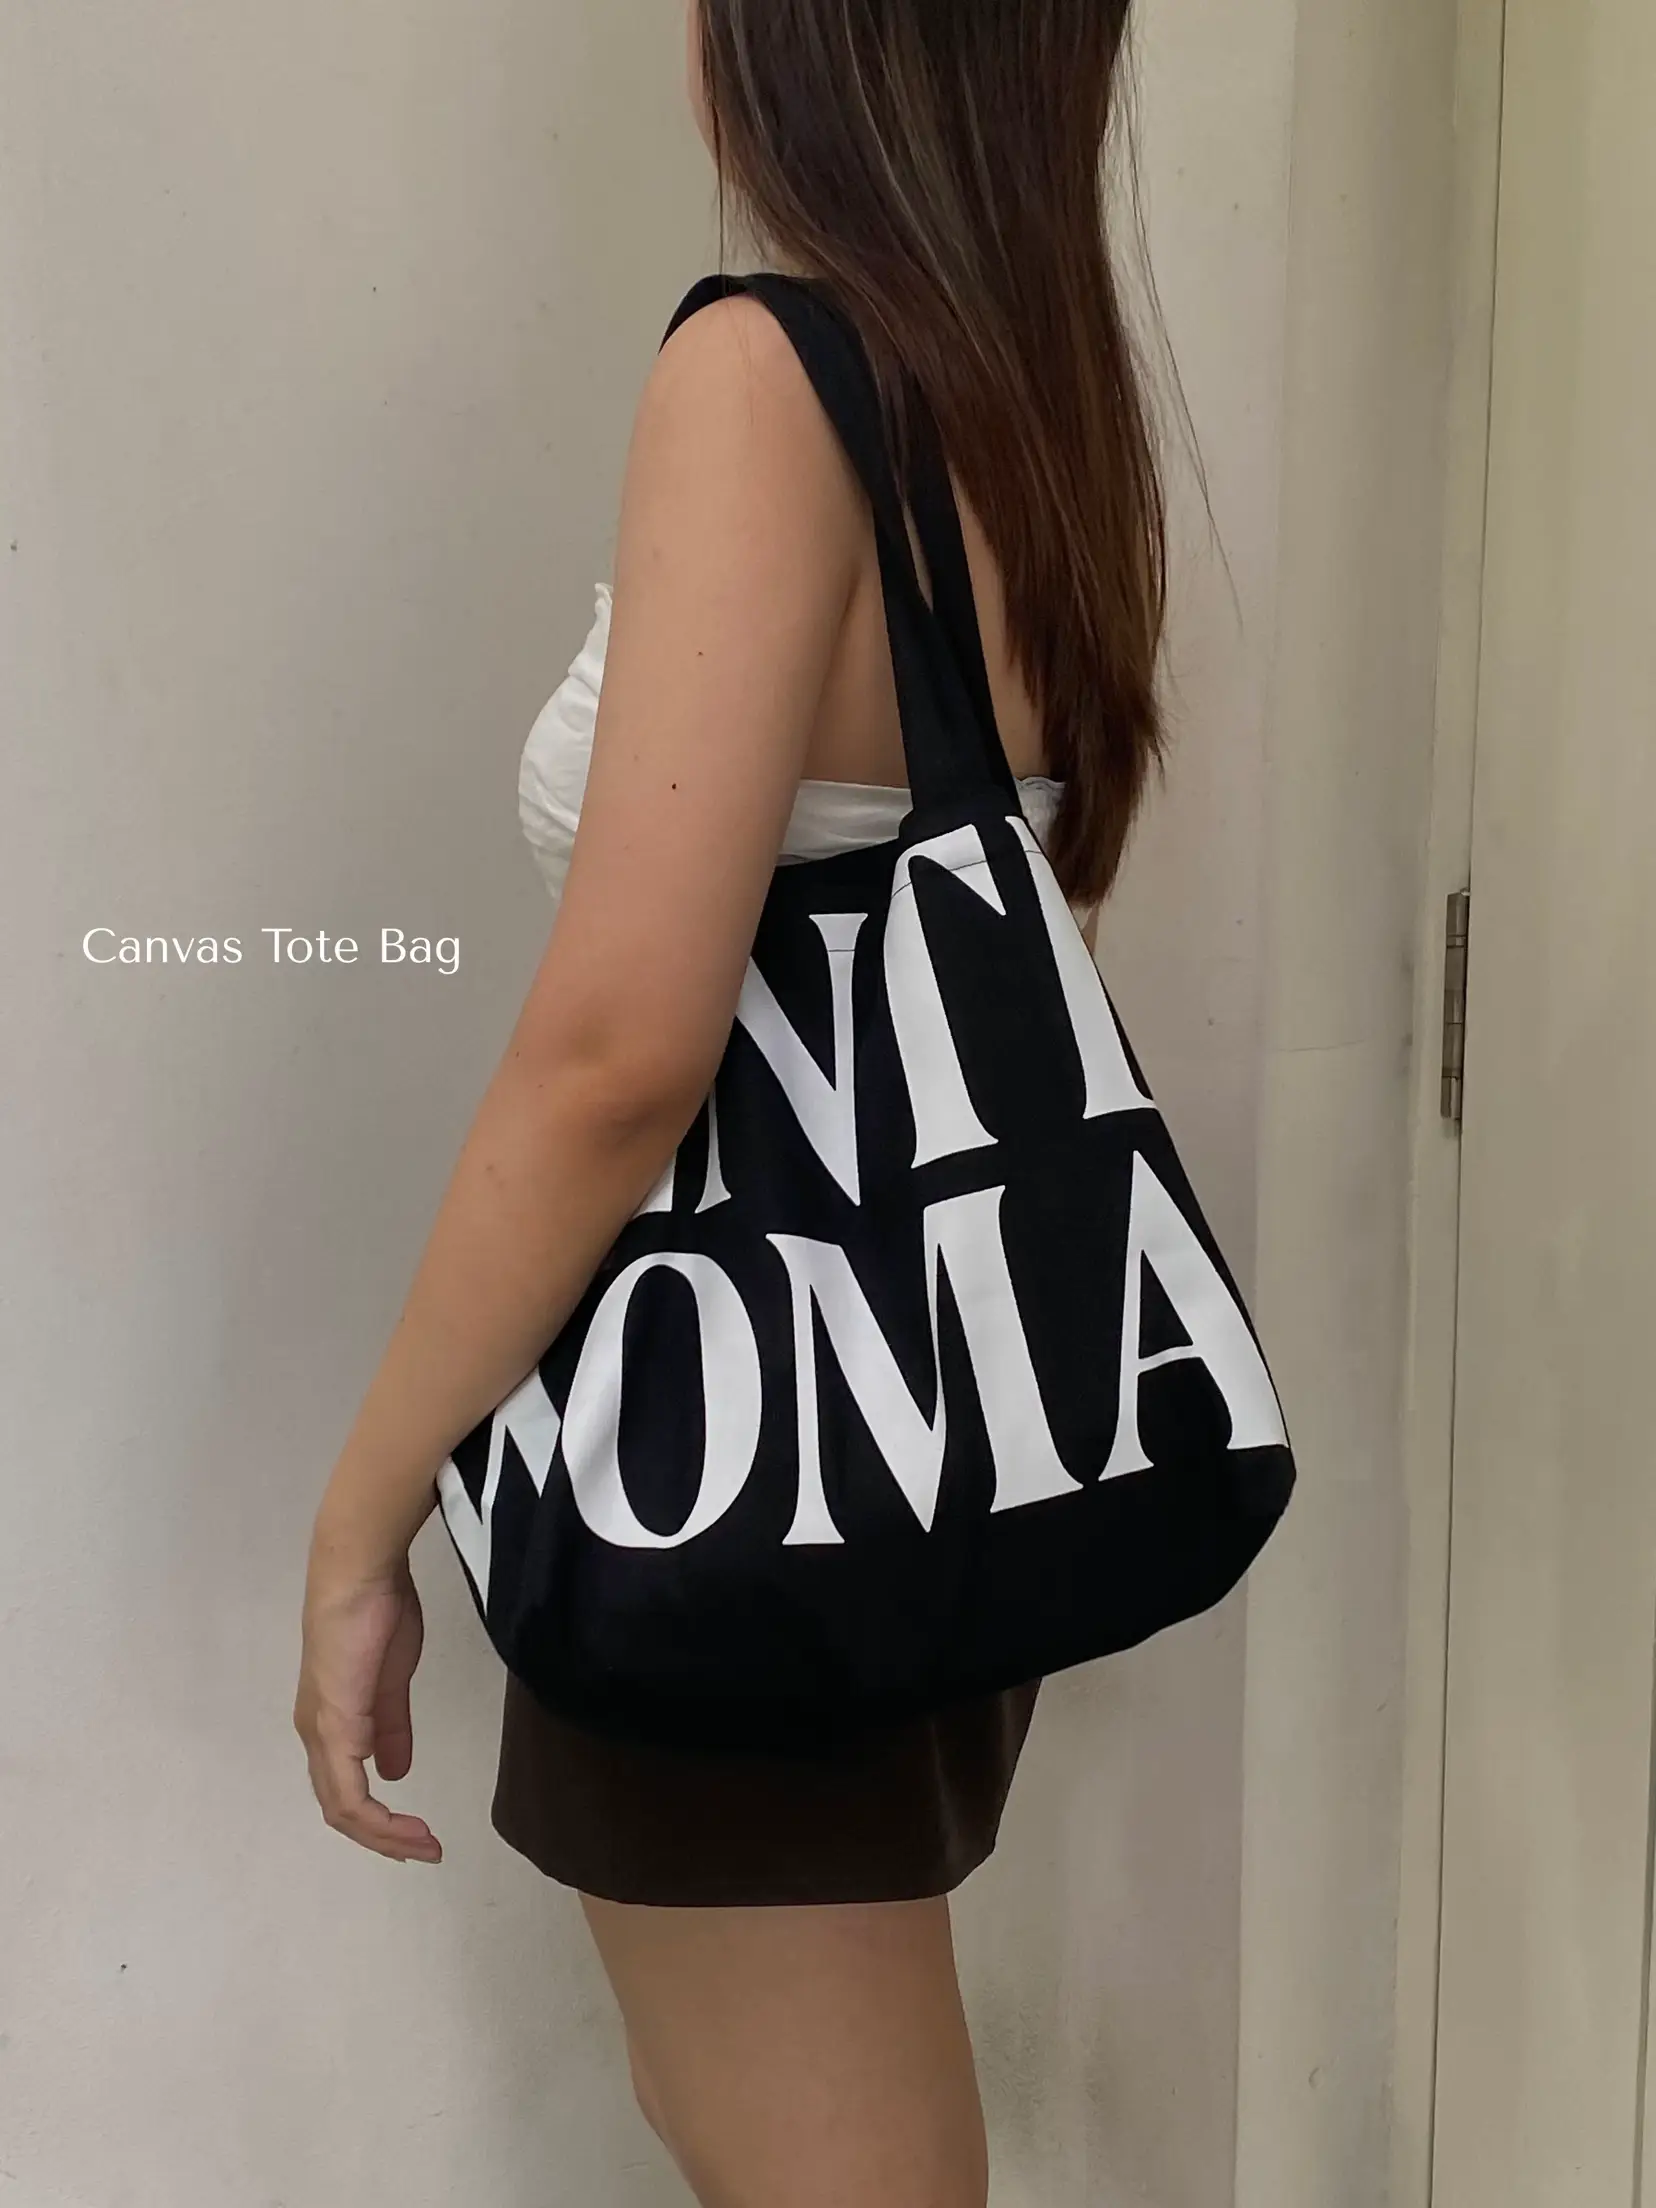 TikTok found an L.L.Bean Boat and Tote dupe for $13 on